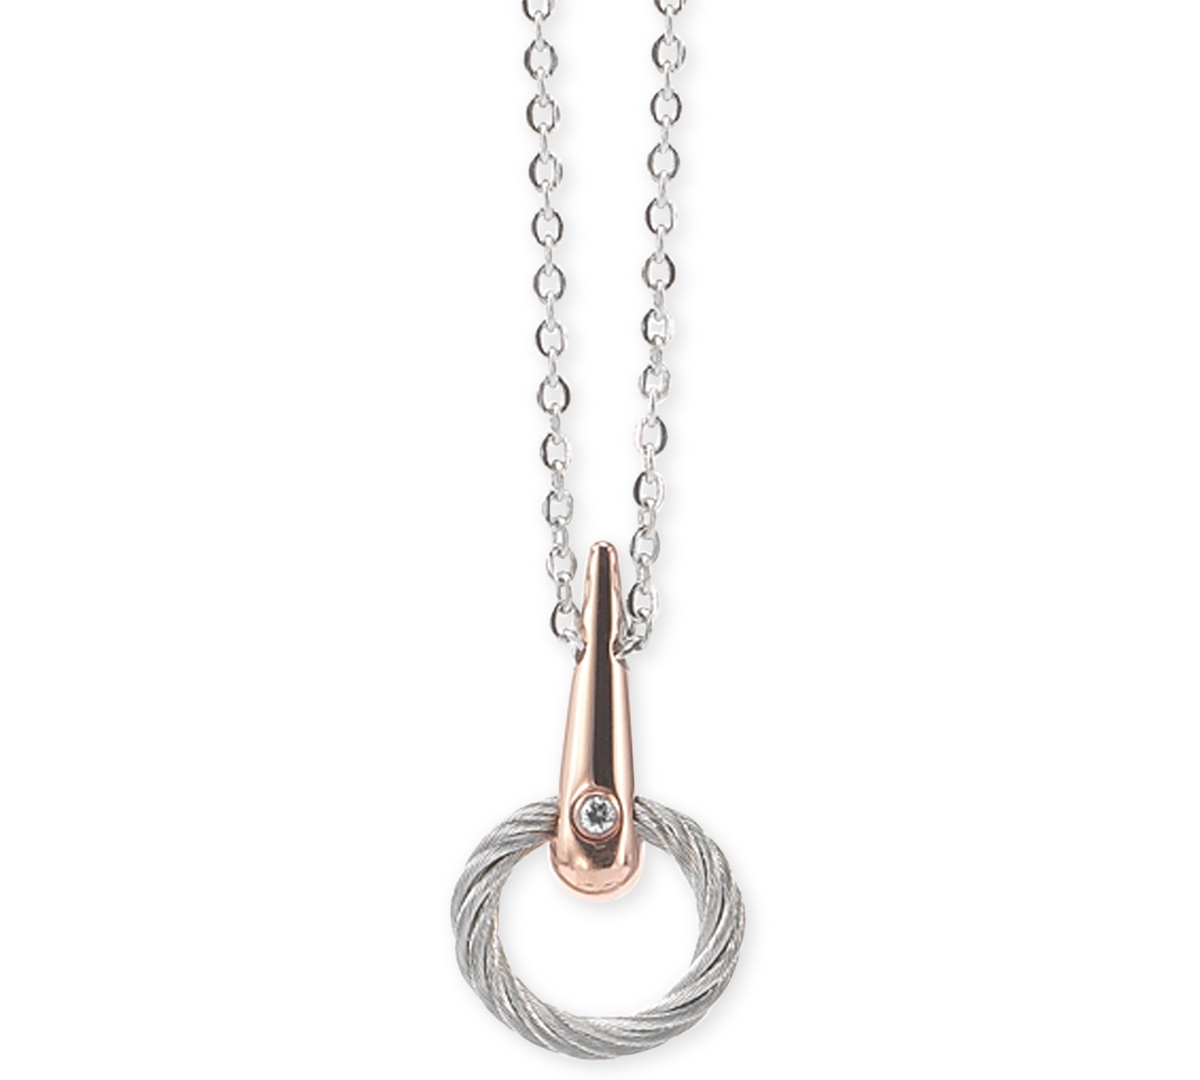 White Topaz Accent Circle Drop 18" Pendant Necklace in Pvd Stainless Steel & Rose Gold-Tone - Rose Gold/Stainless Steel